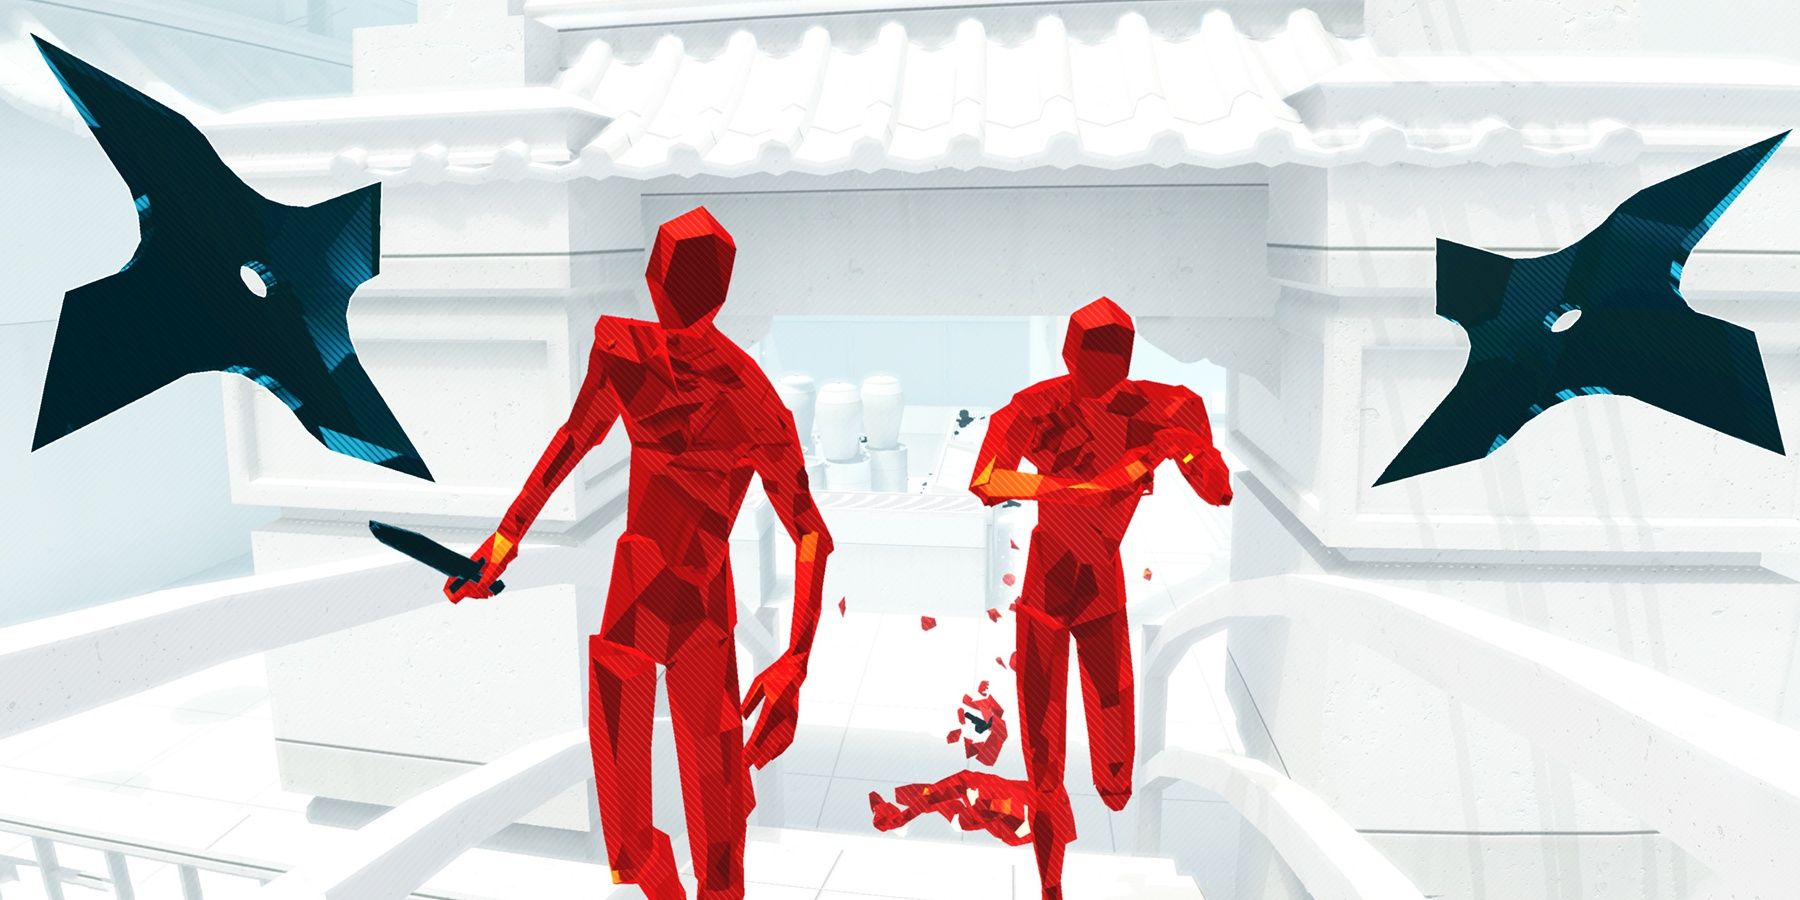 Ninja stars are thrown at red nondescript people coming toward the camera with weapons